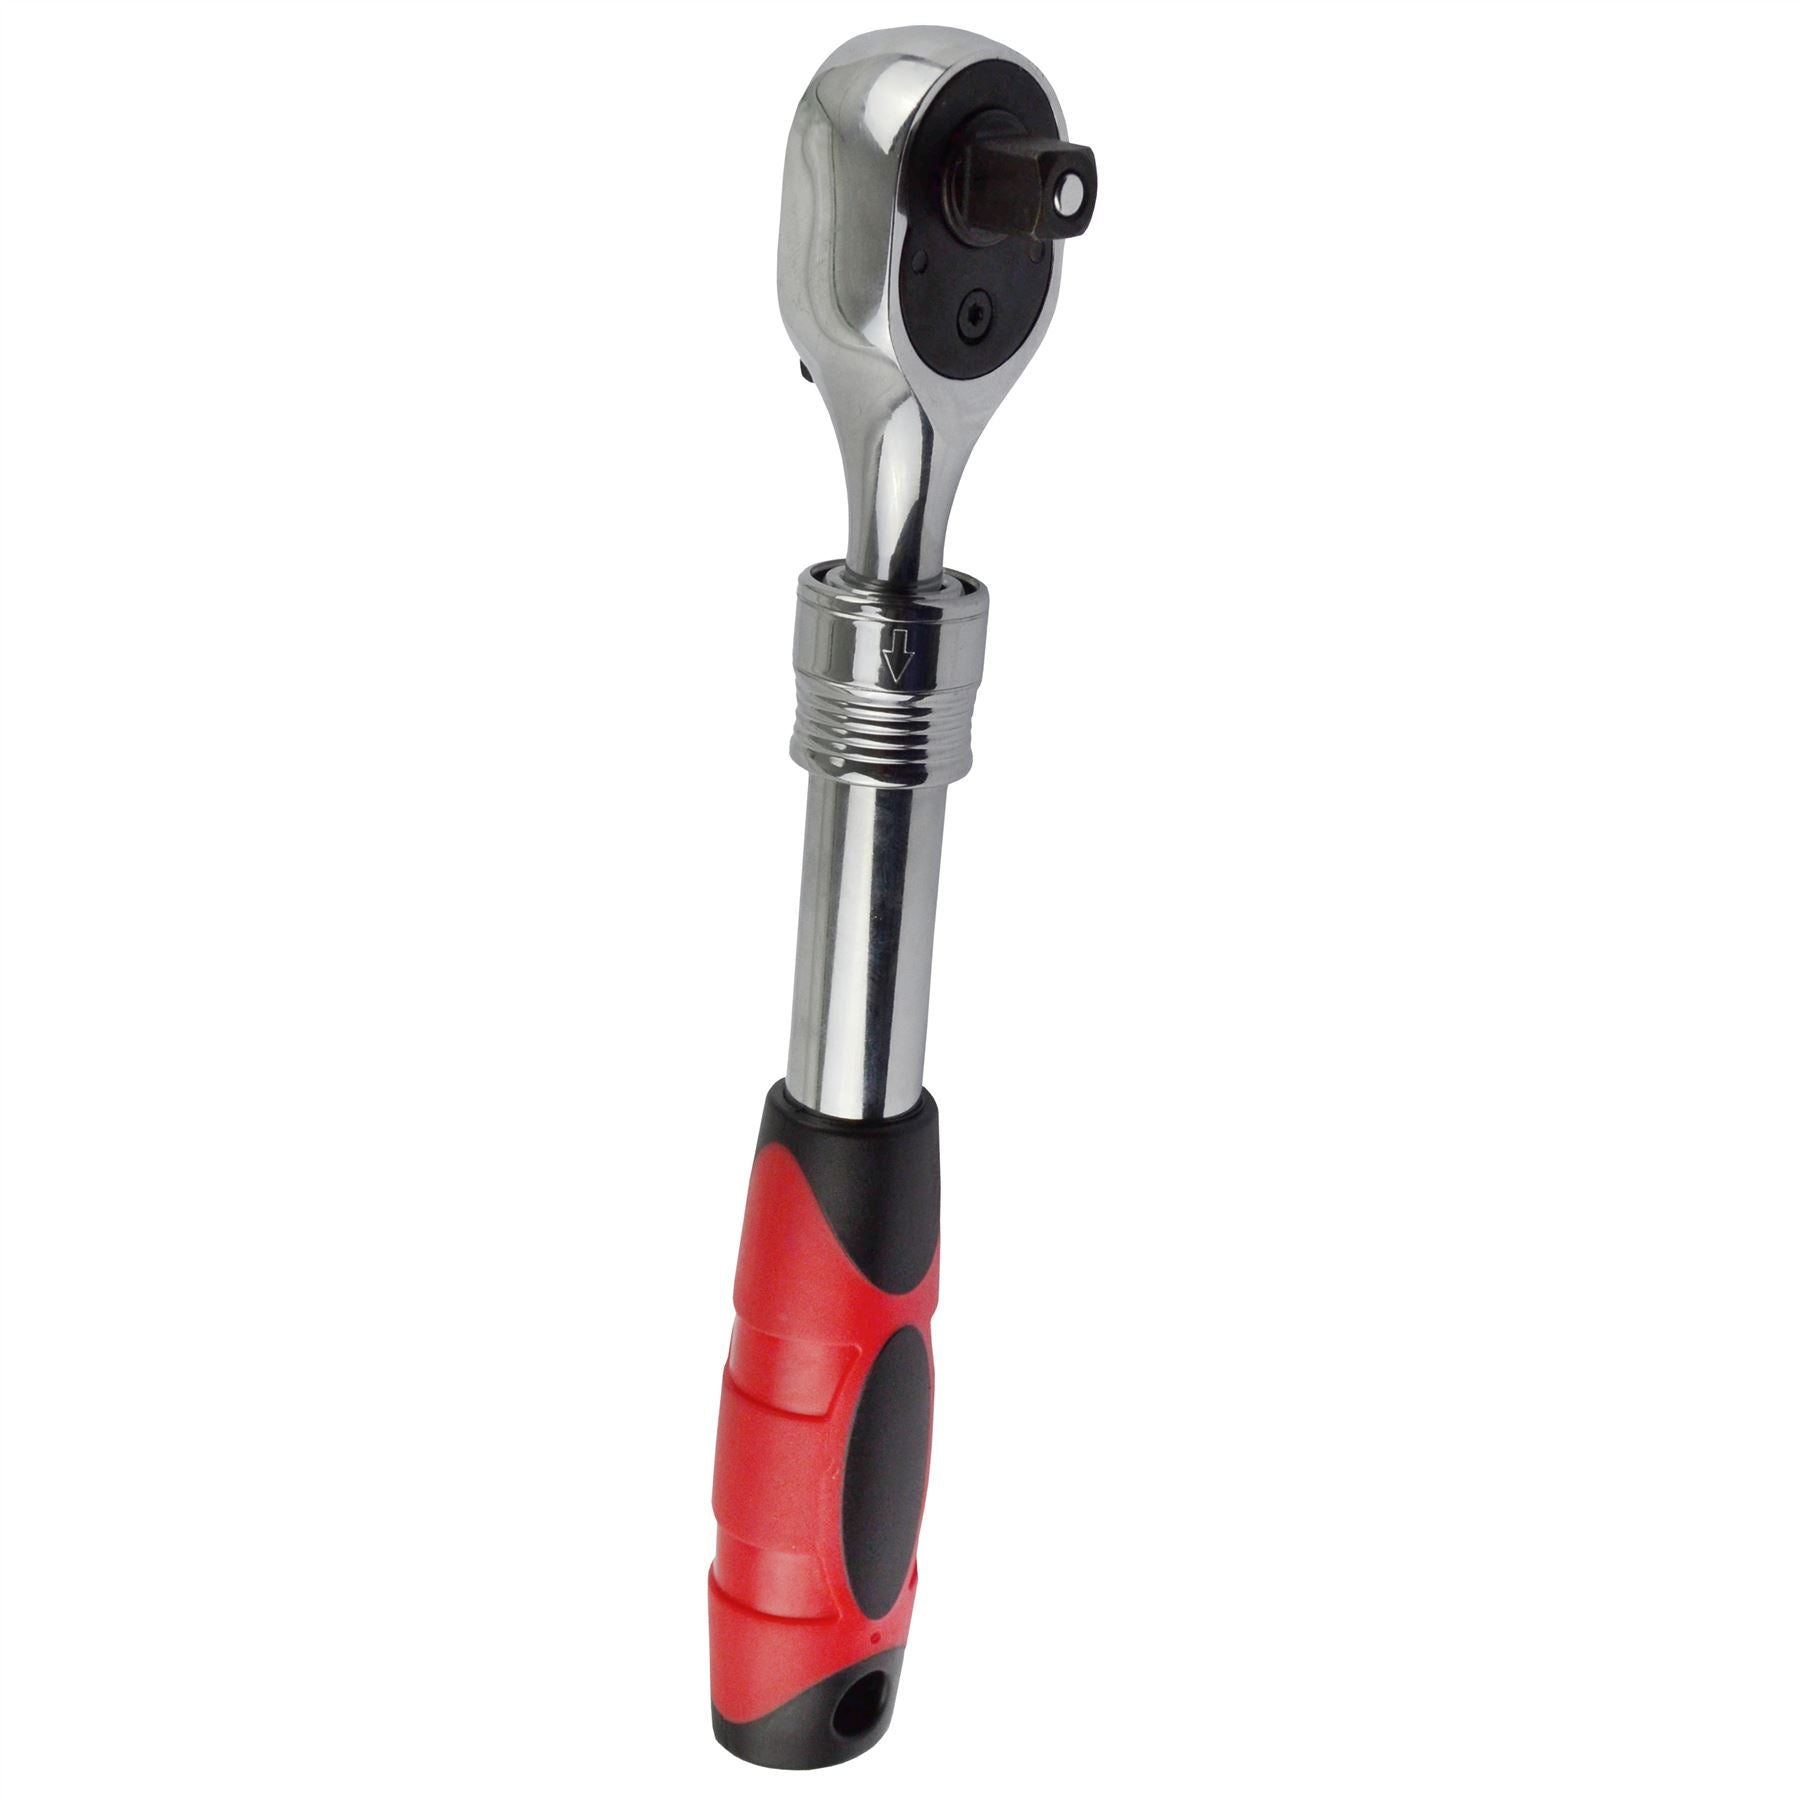 1/2" drive Extendable Ratchet 12-18" (300mm-460mm) socket driver by US-Pro AT311